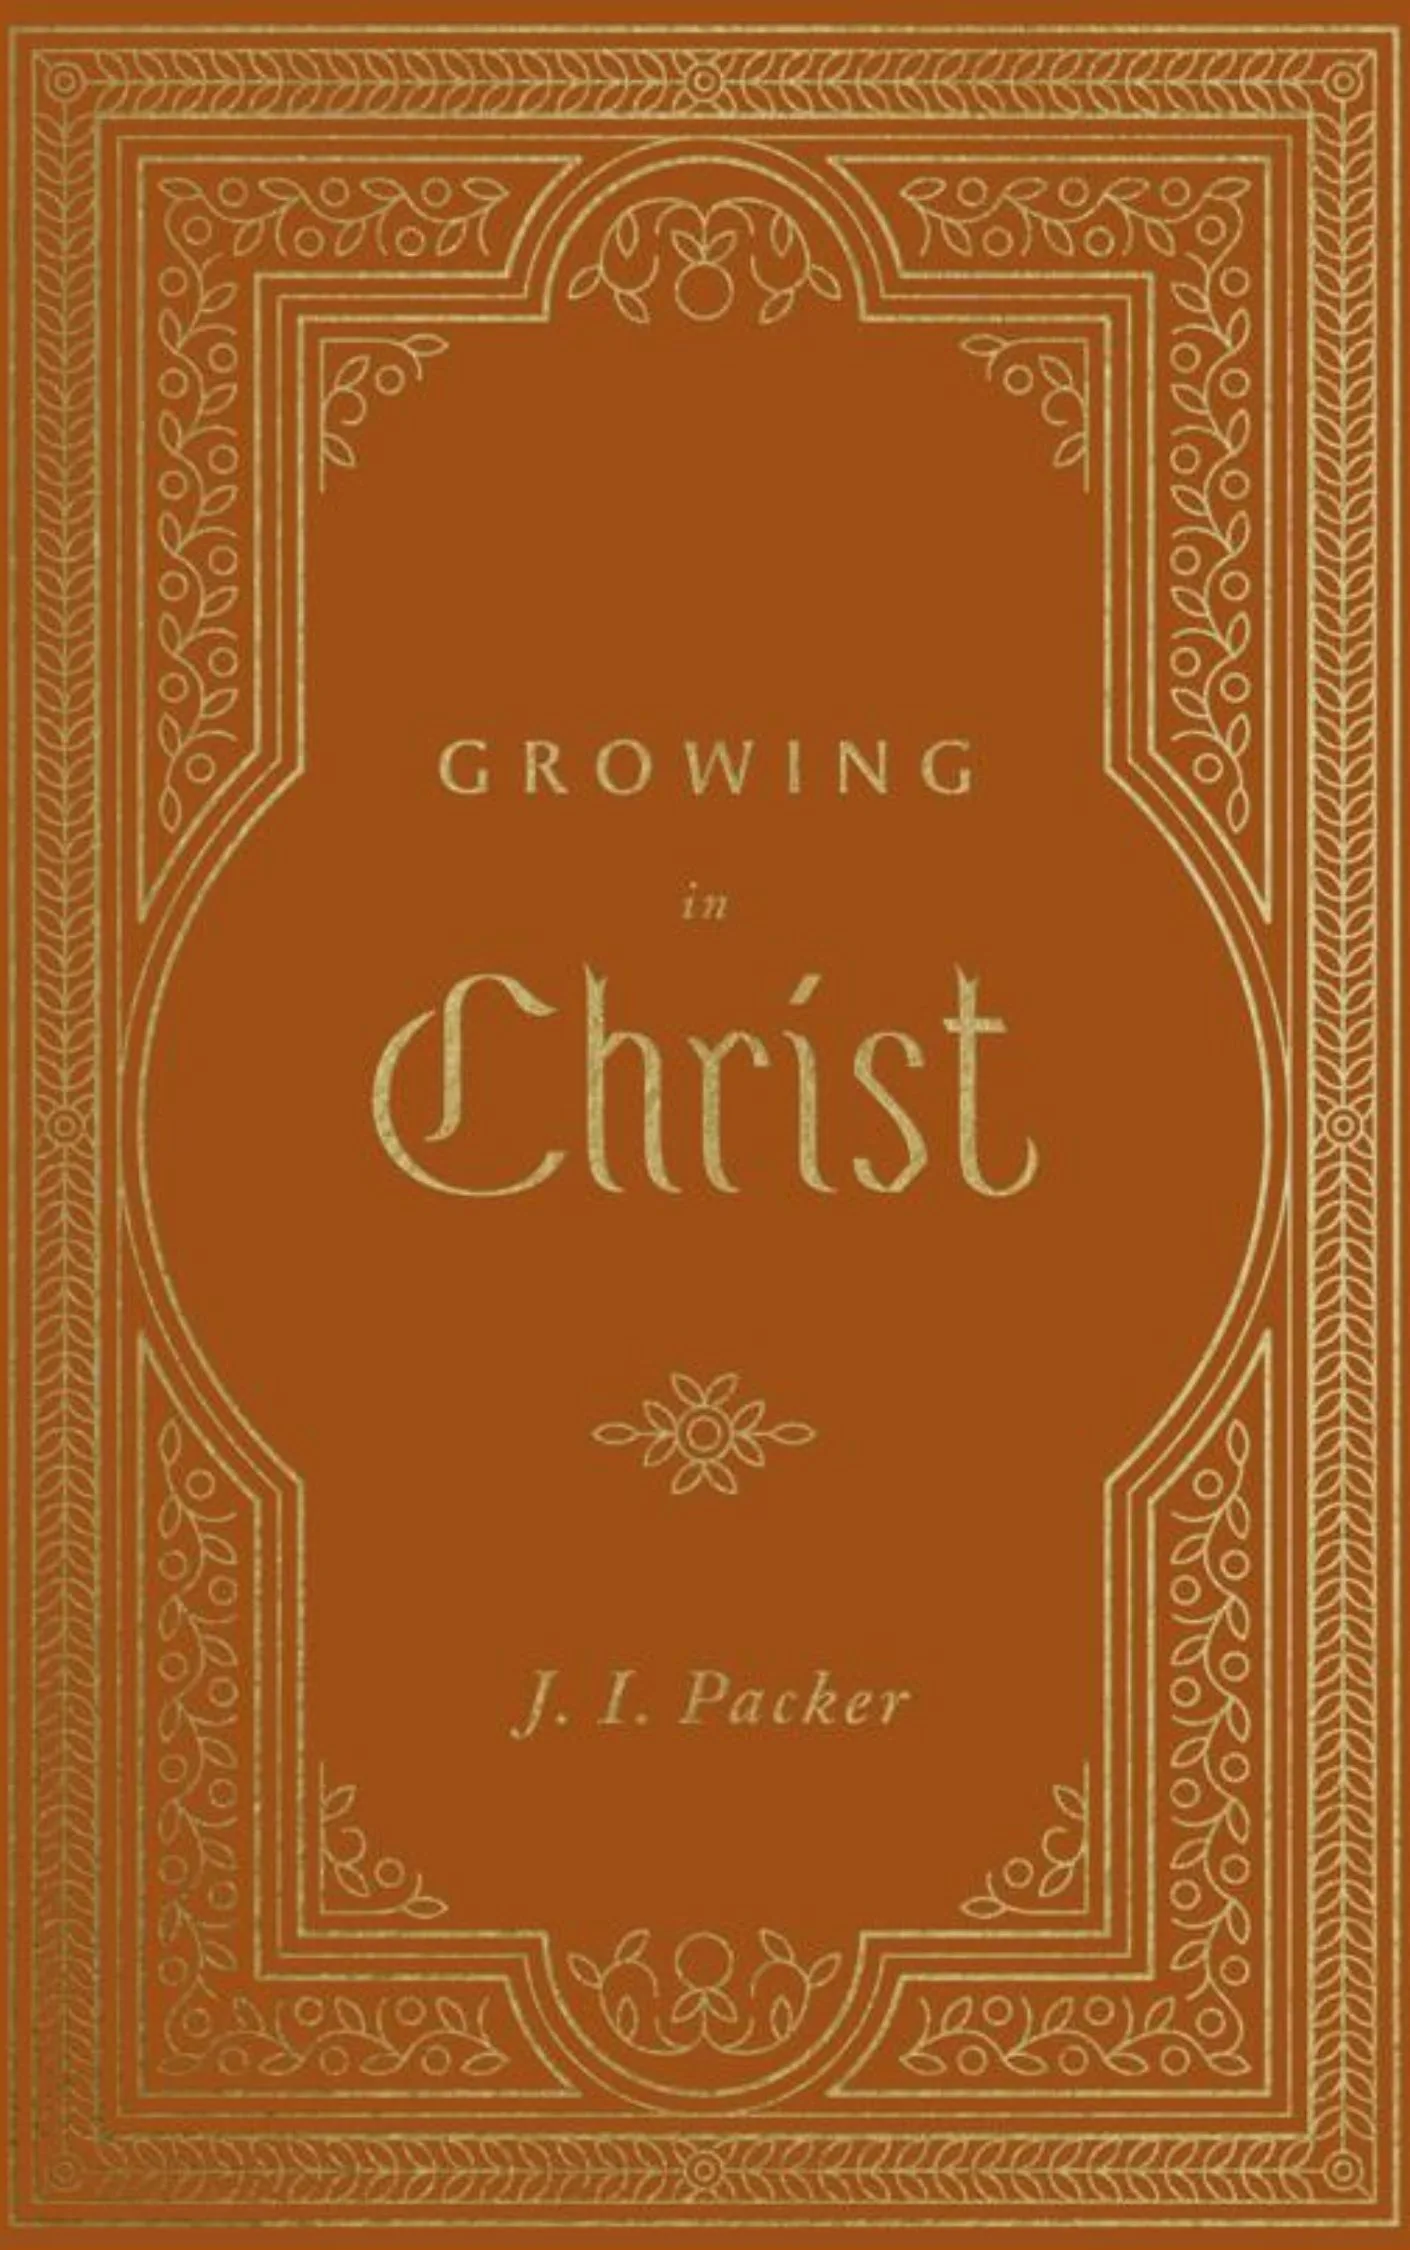 Growing in Christ by J.I. Packer